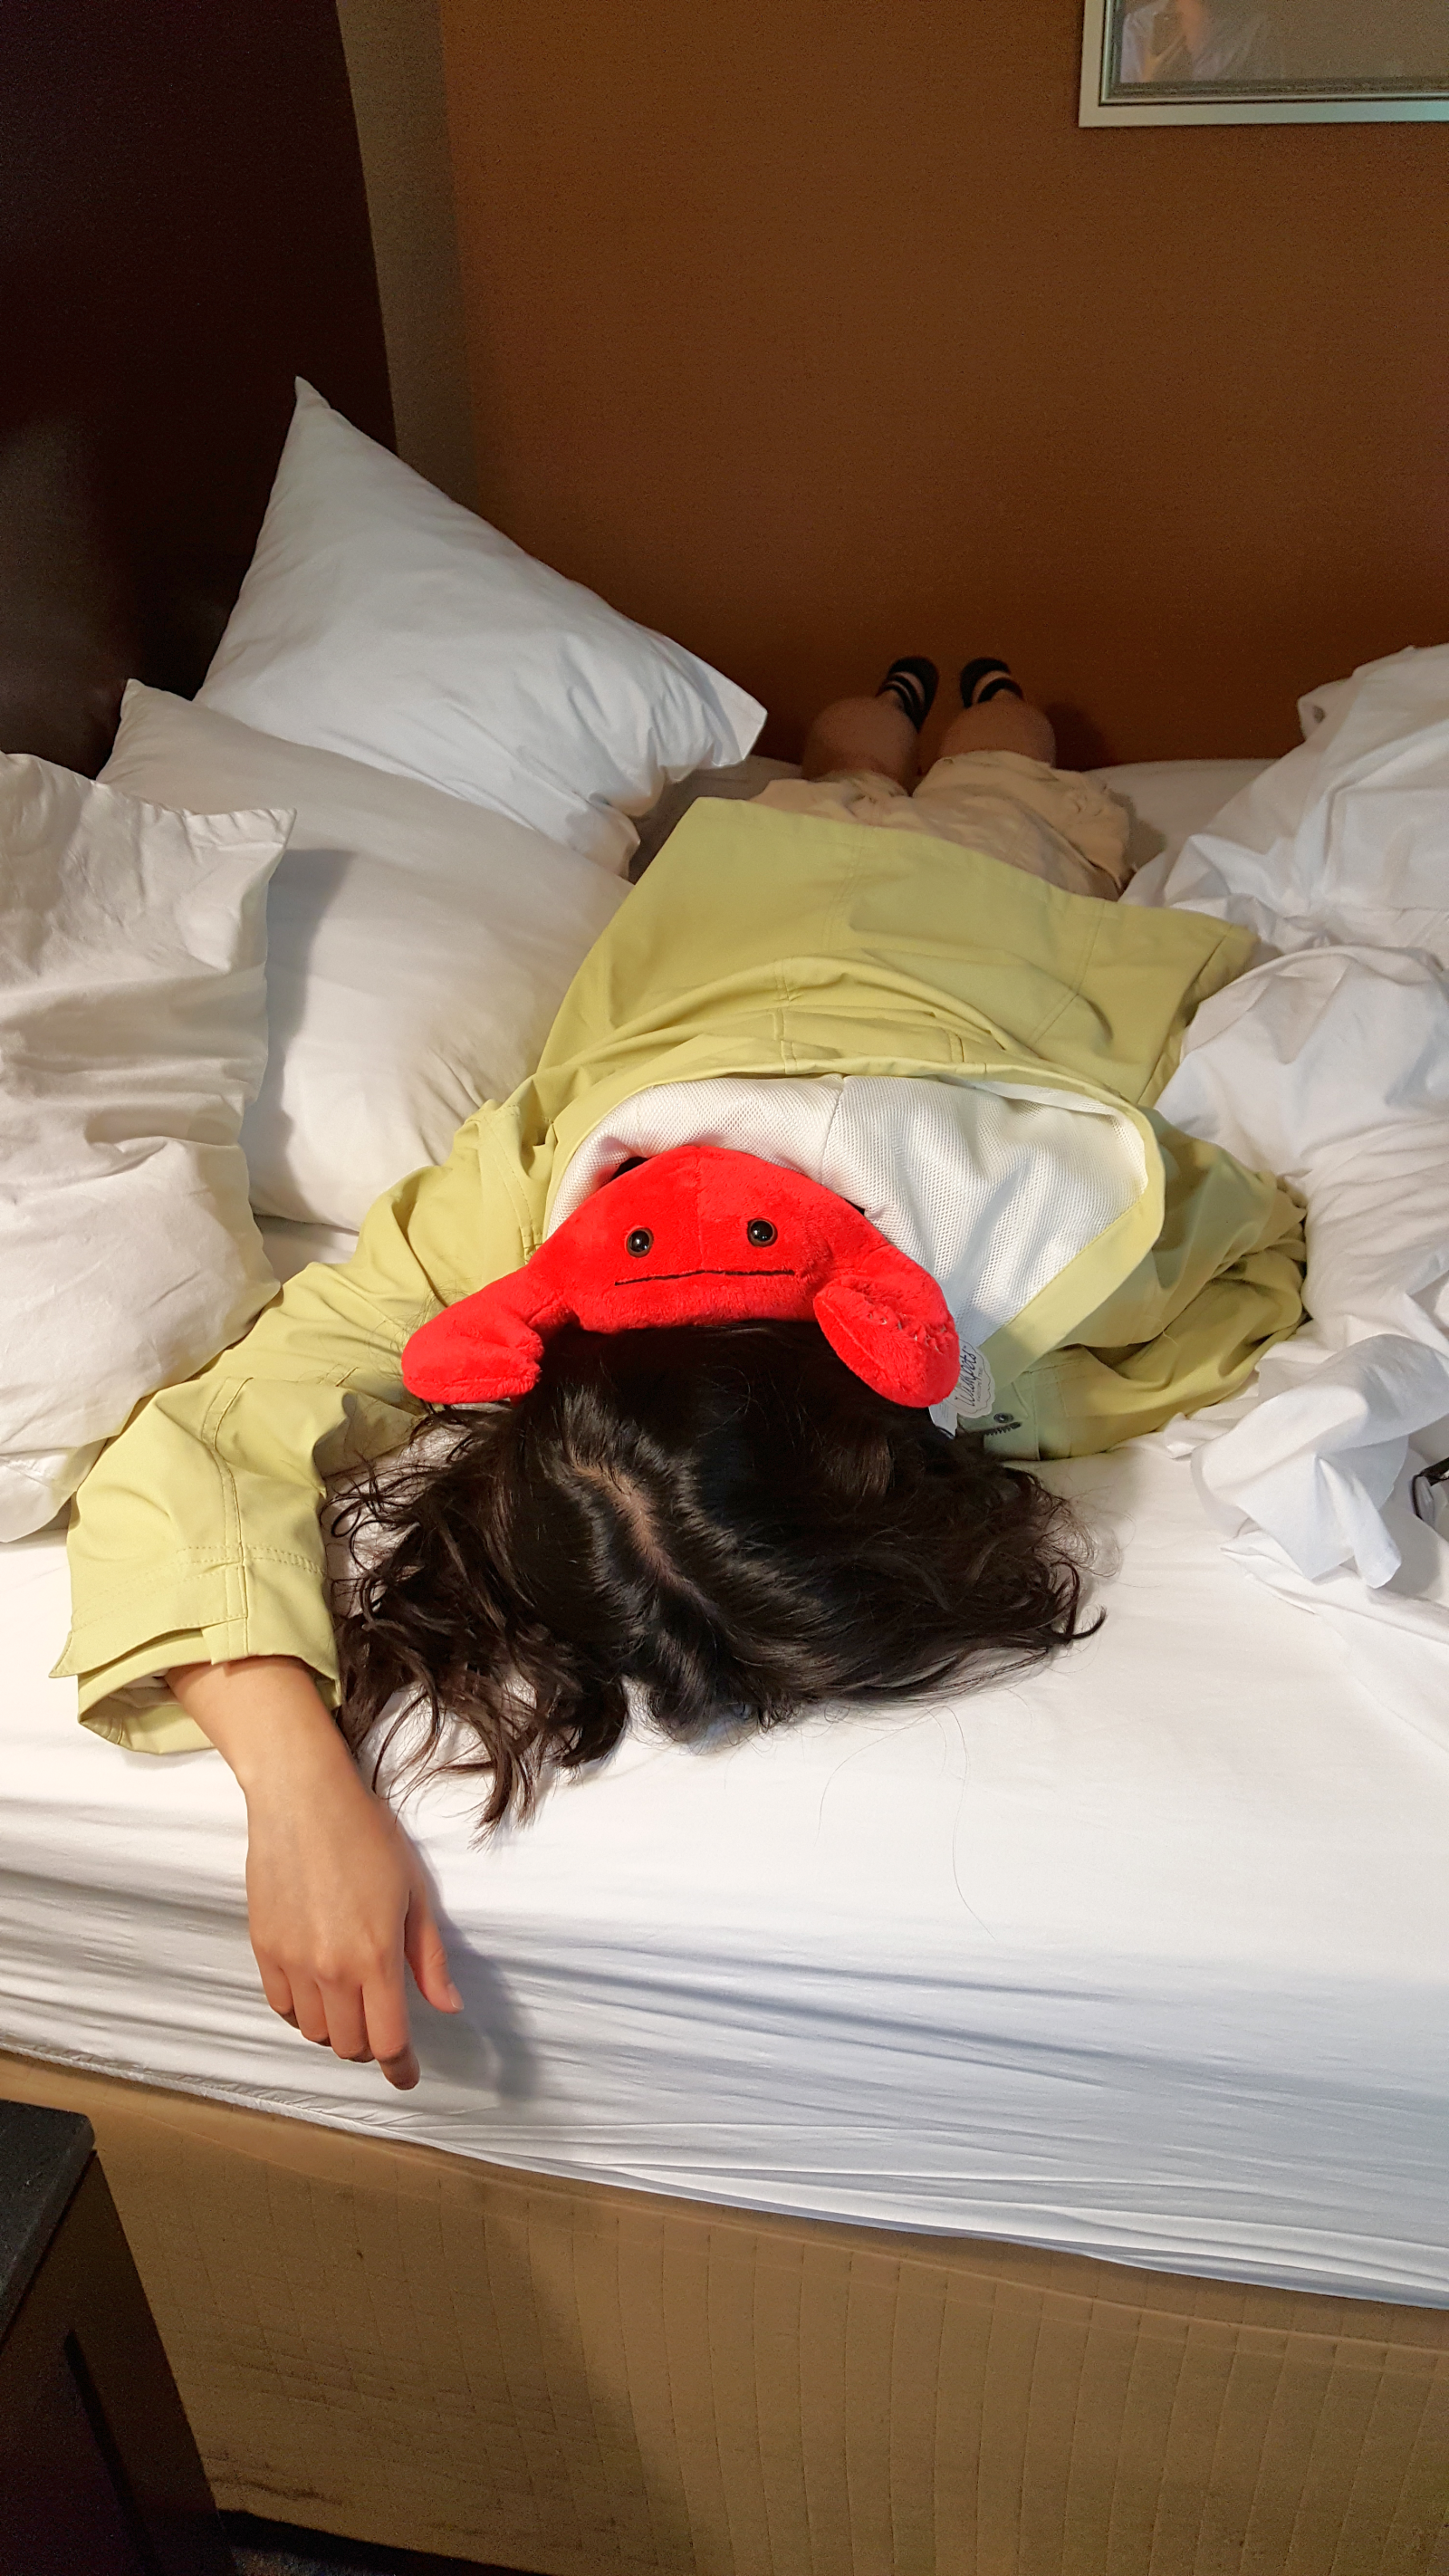 Entropyenator passed out with stuffed crab on head